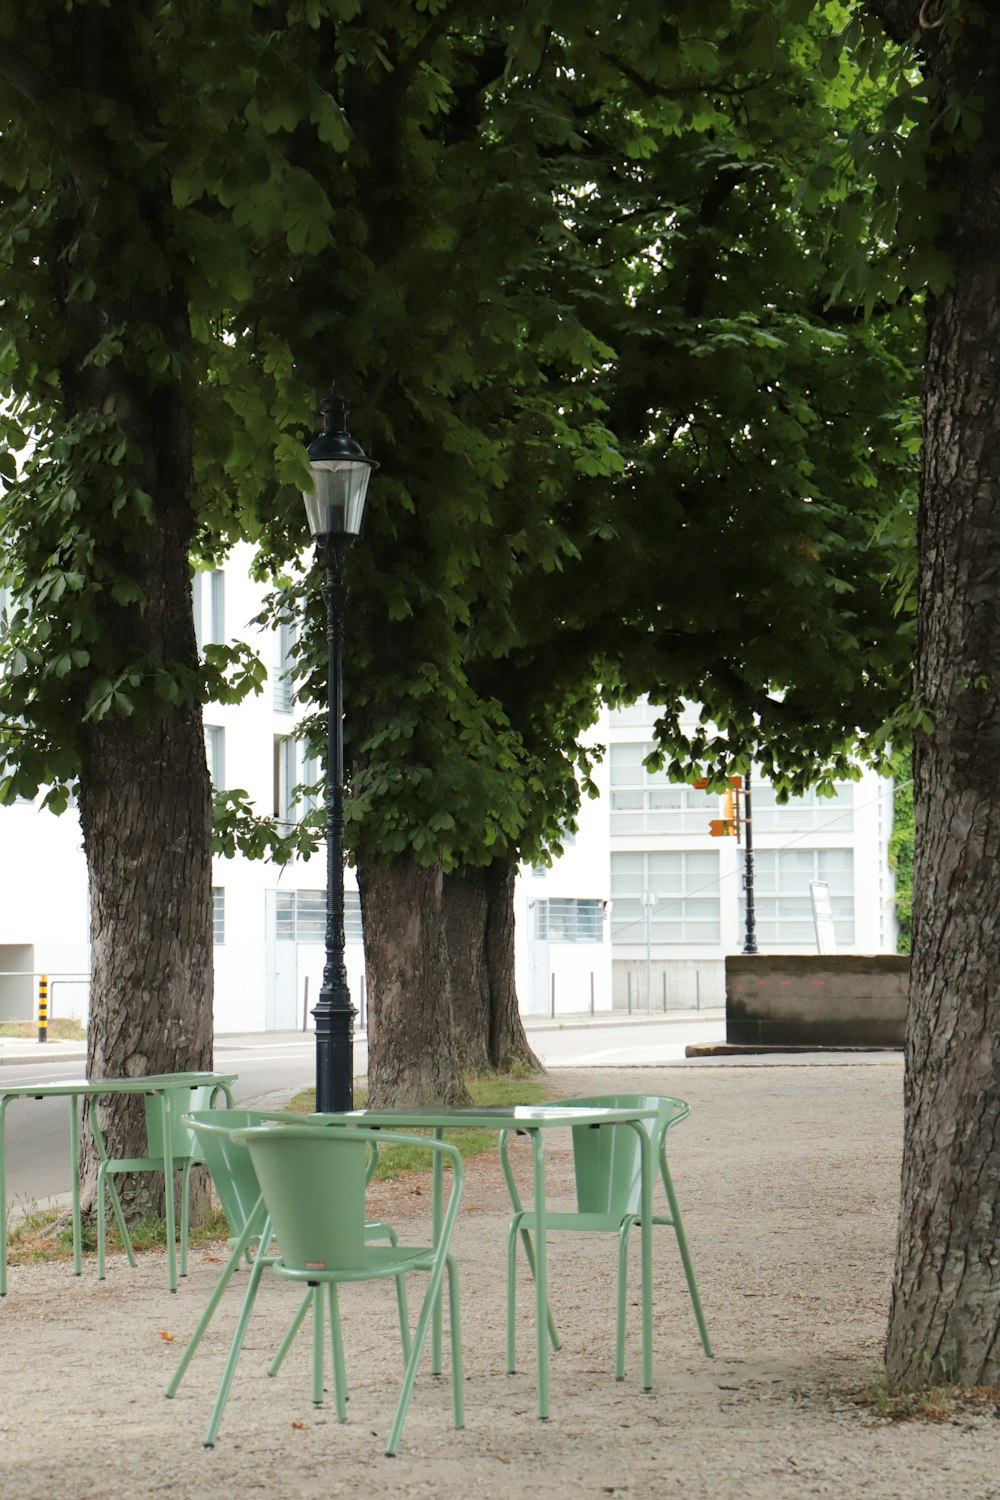 a group of green chairs and a lamp post on a sidewalk